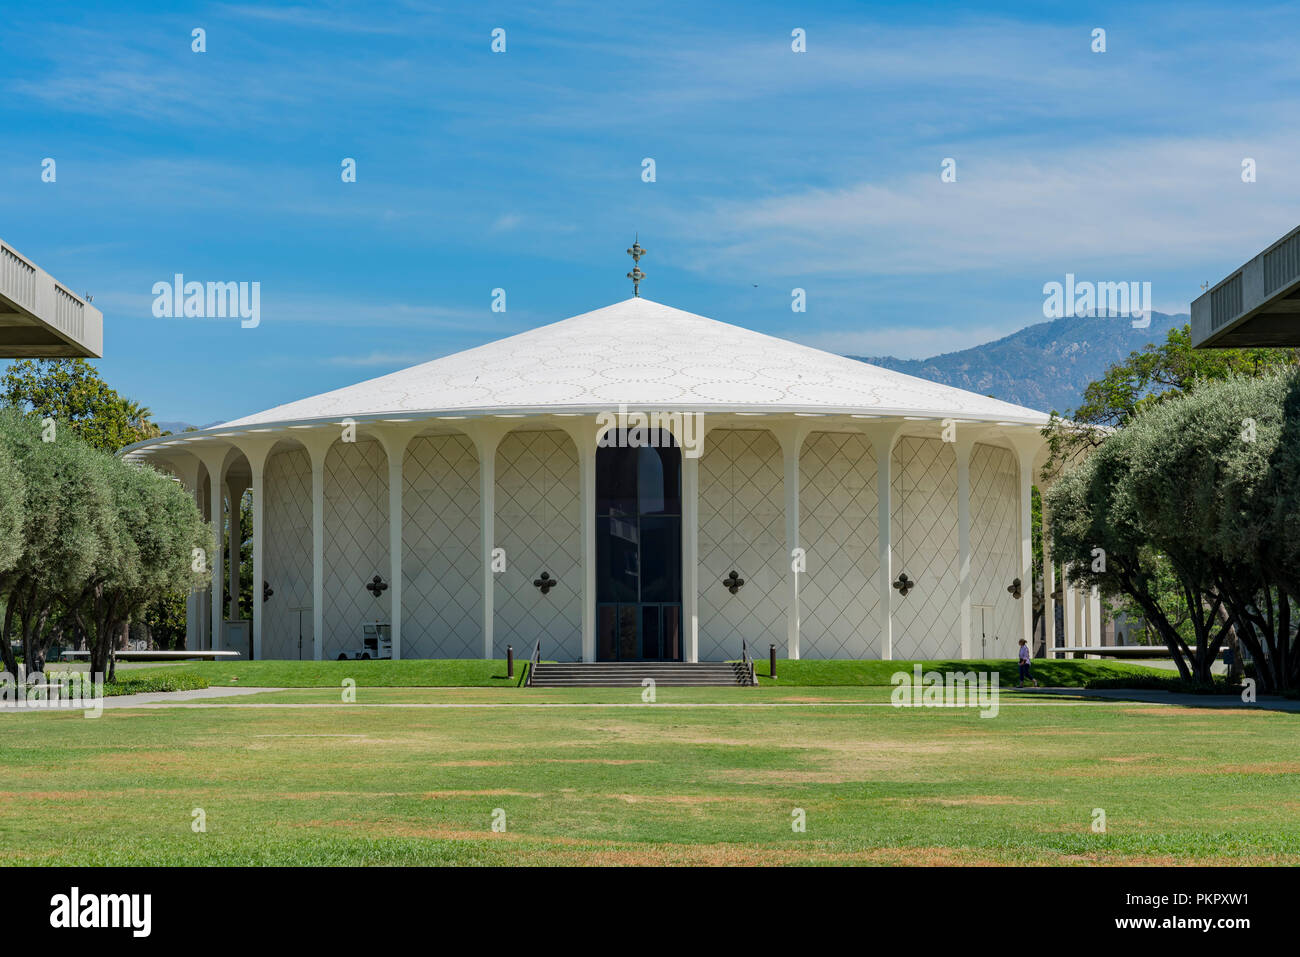 Los Angeles, JUL 21: Exterior view of the Beckman Auditorium in Caltech on JUL 21, 2018 at Los Angeles, California Stock Photo